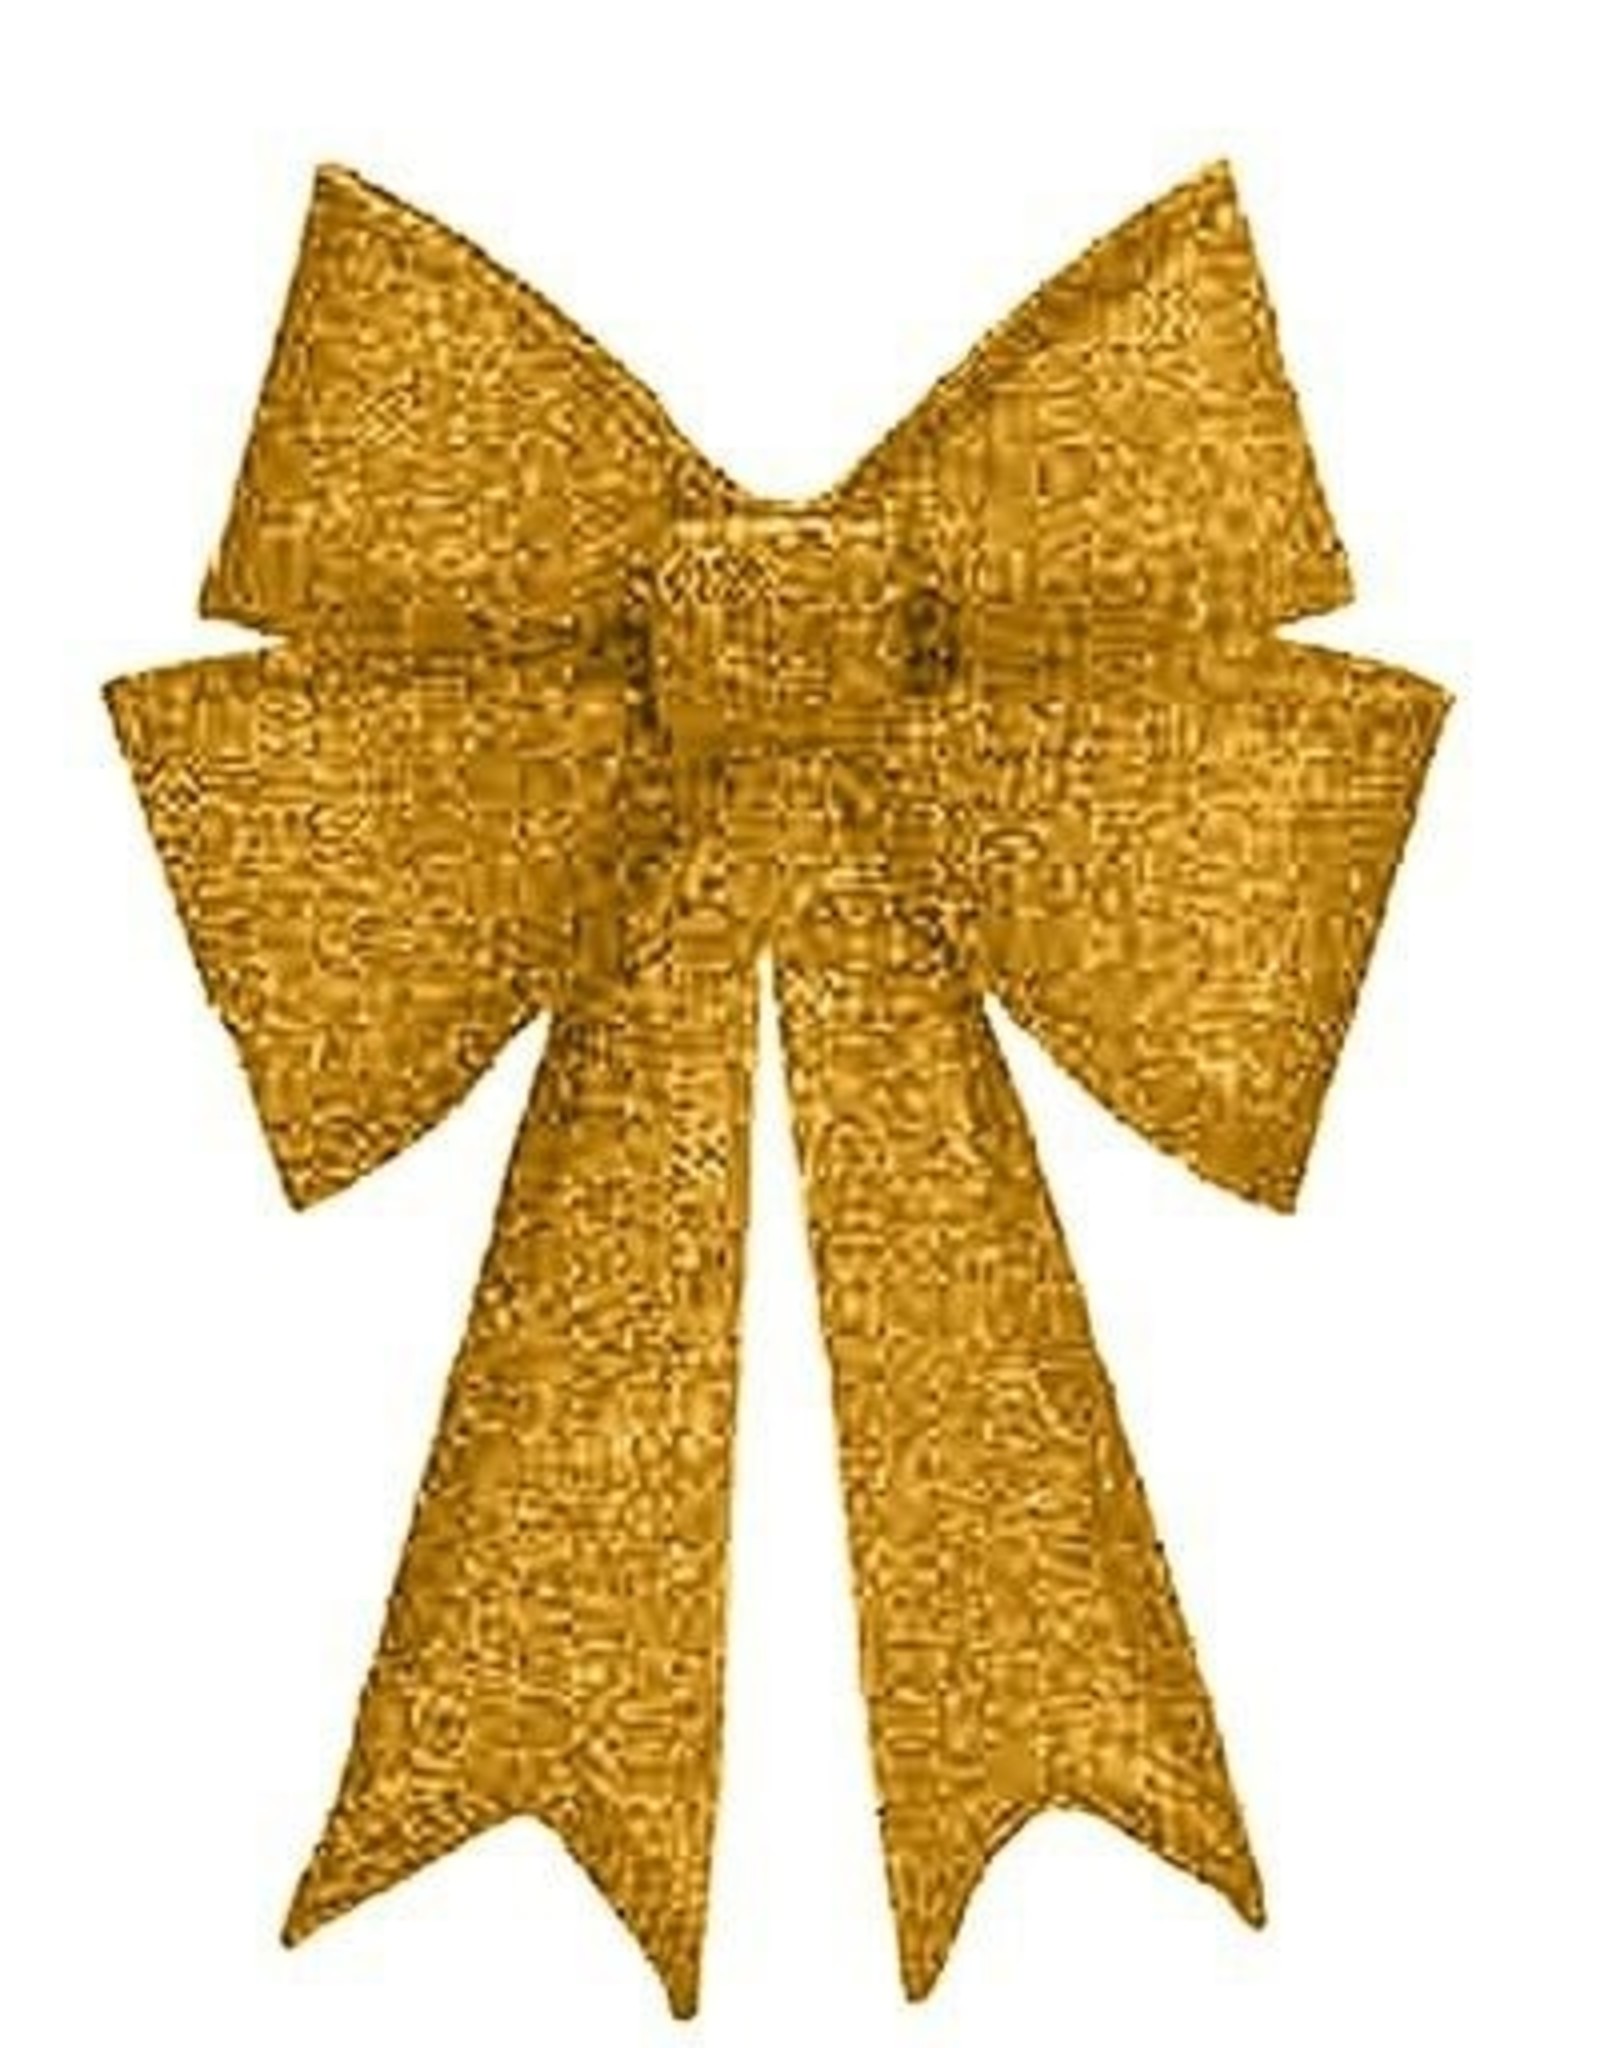 Shimmering Gold Glitter Fabric Mesh Bow XLG 23.5in